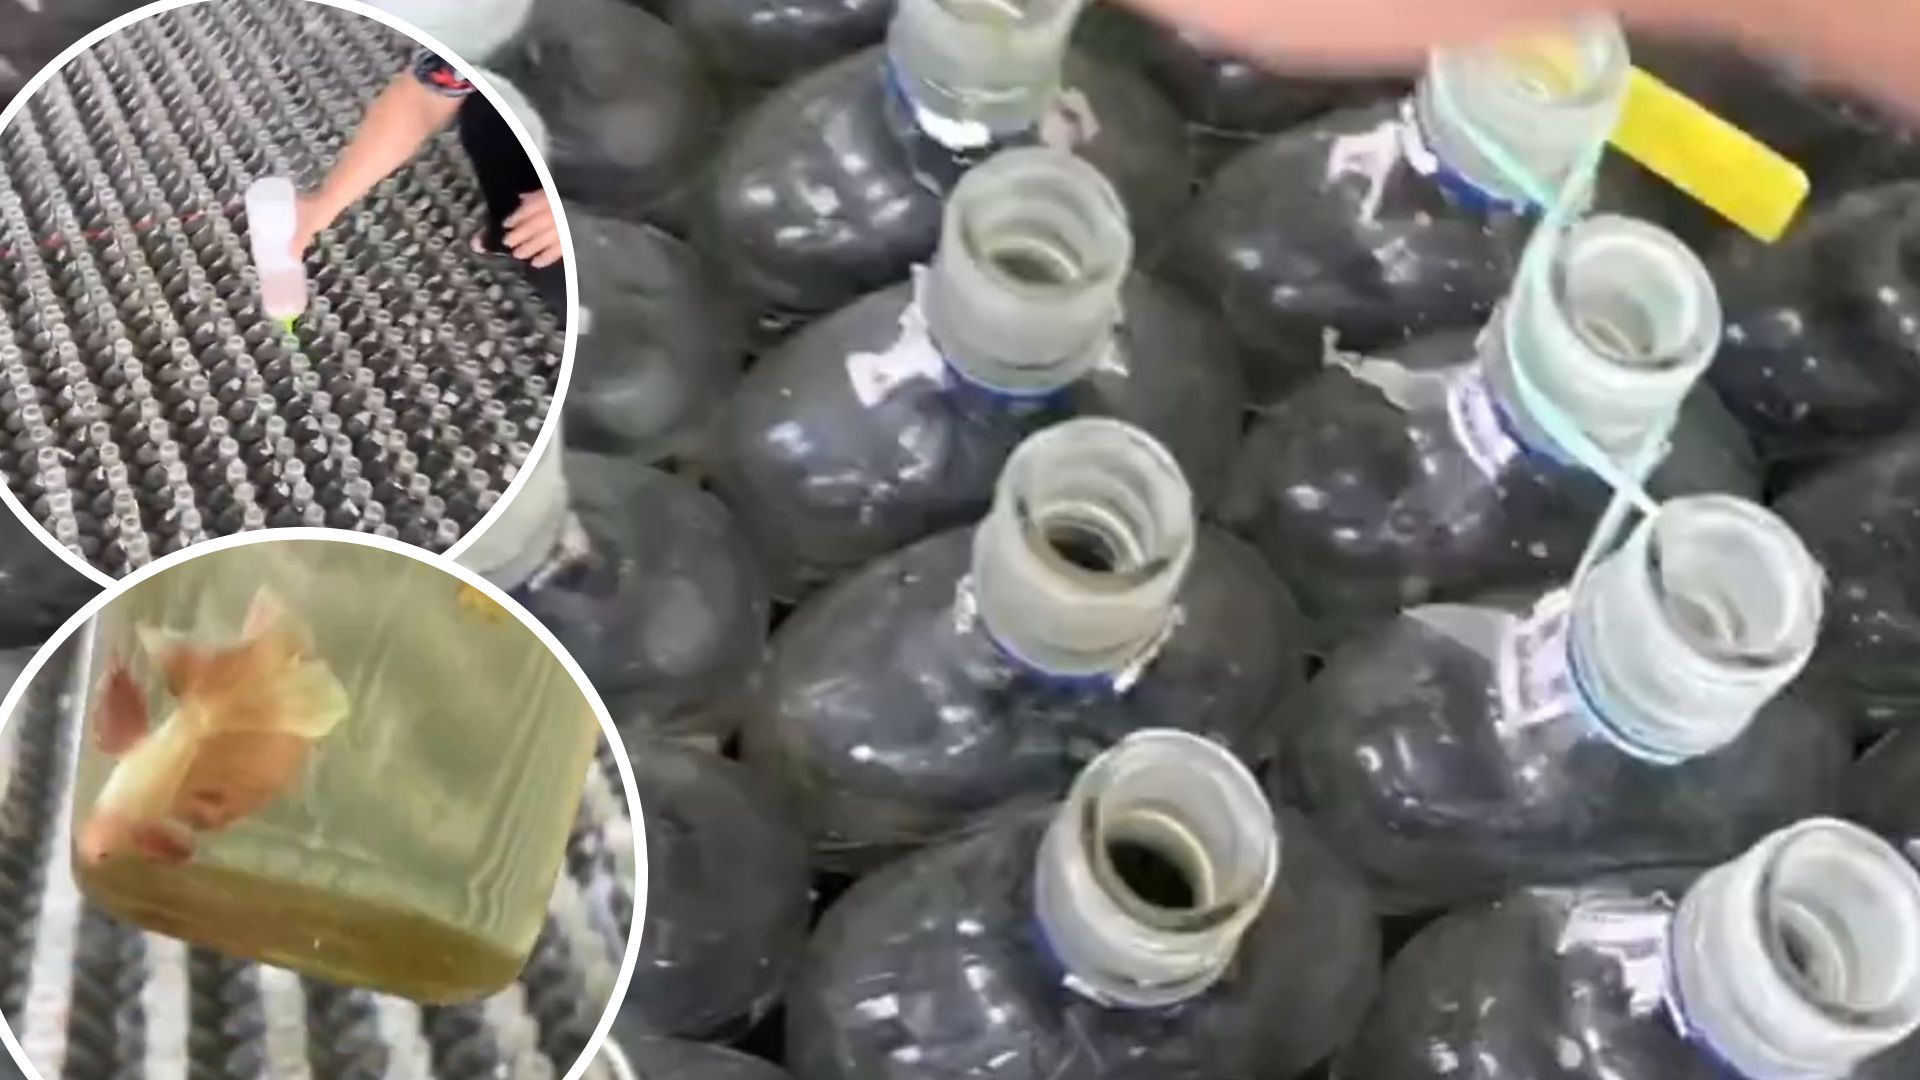 People React to Fish Raised in Small Bottles